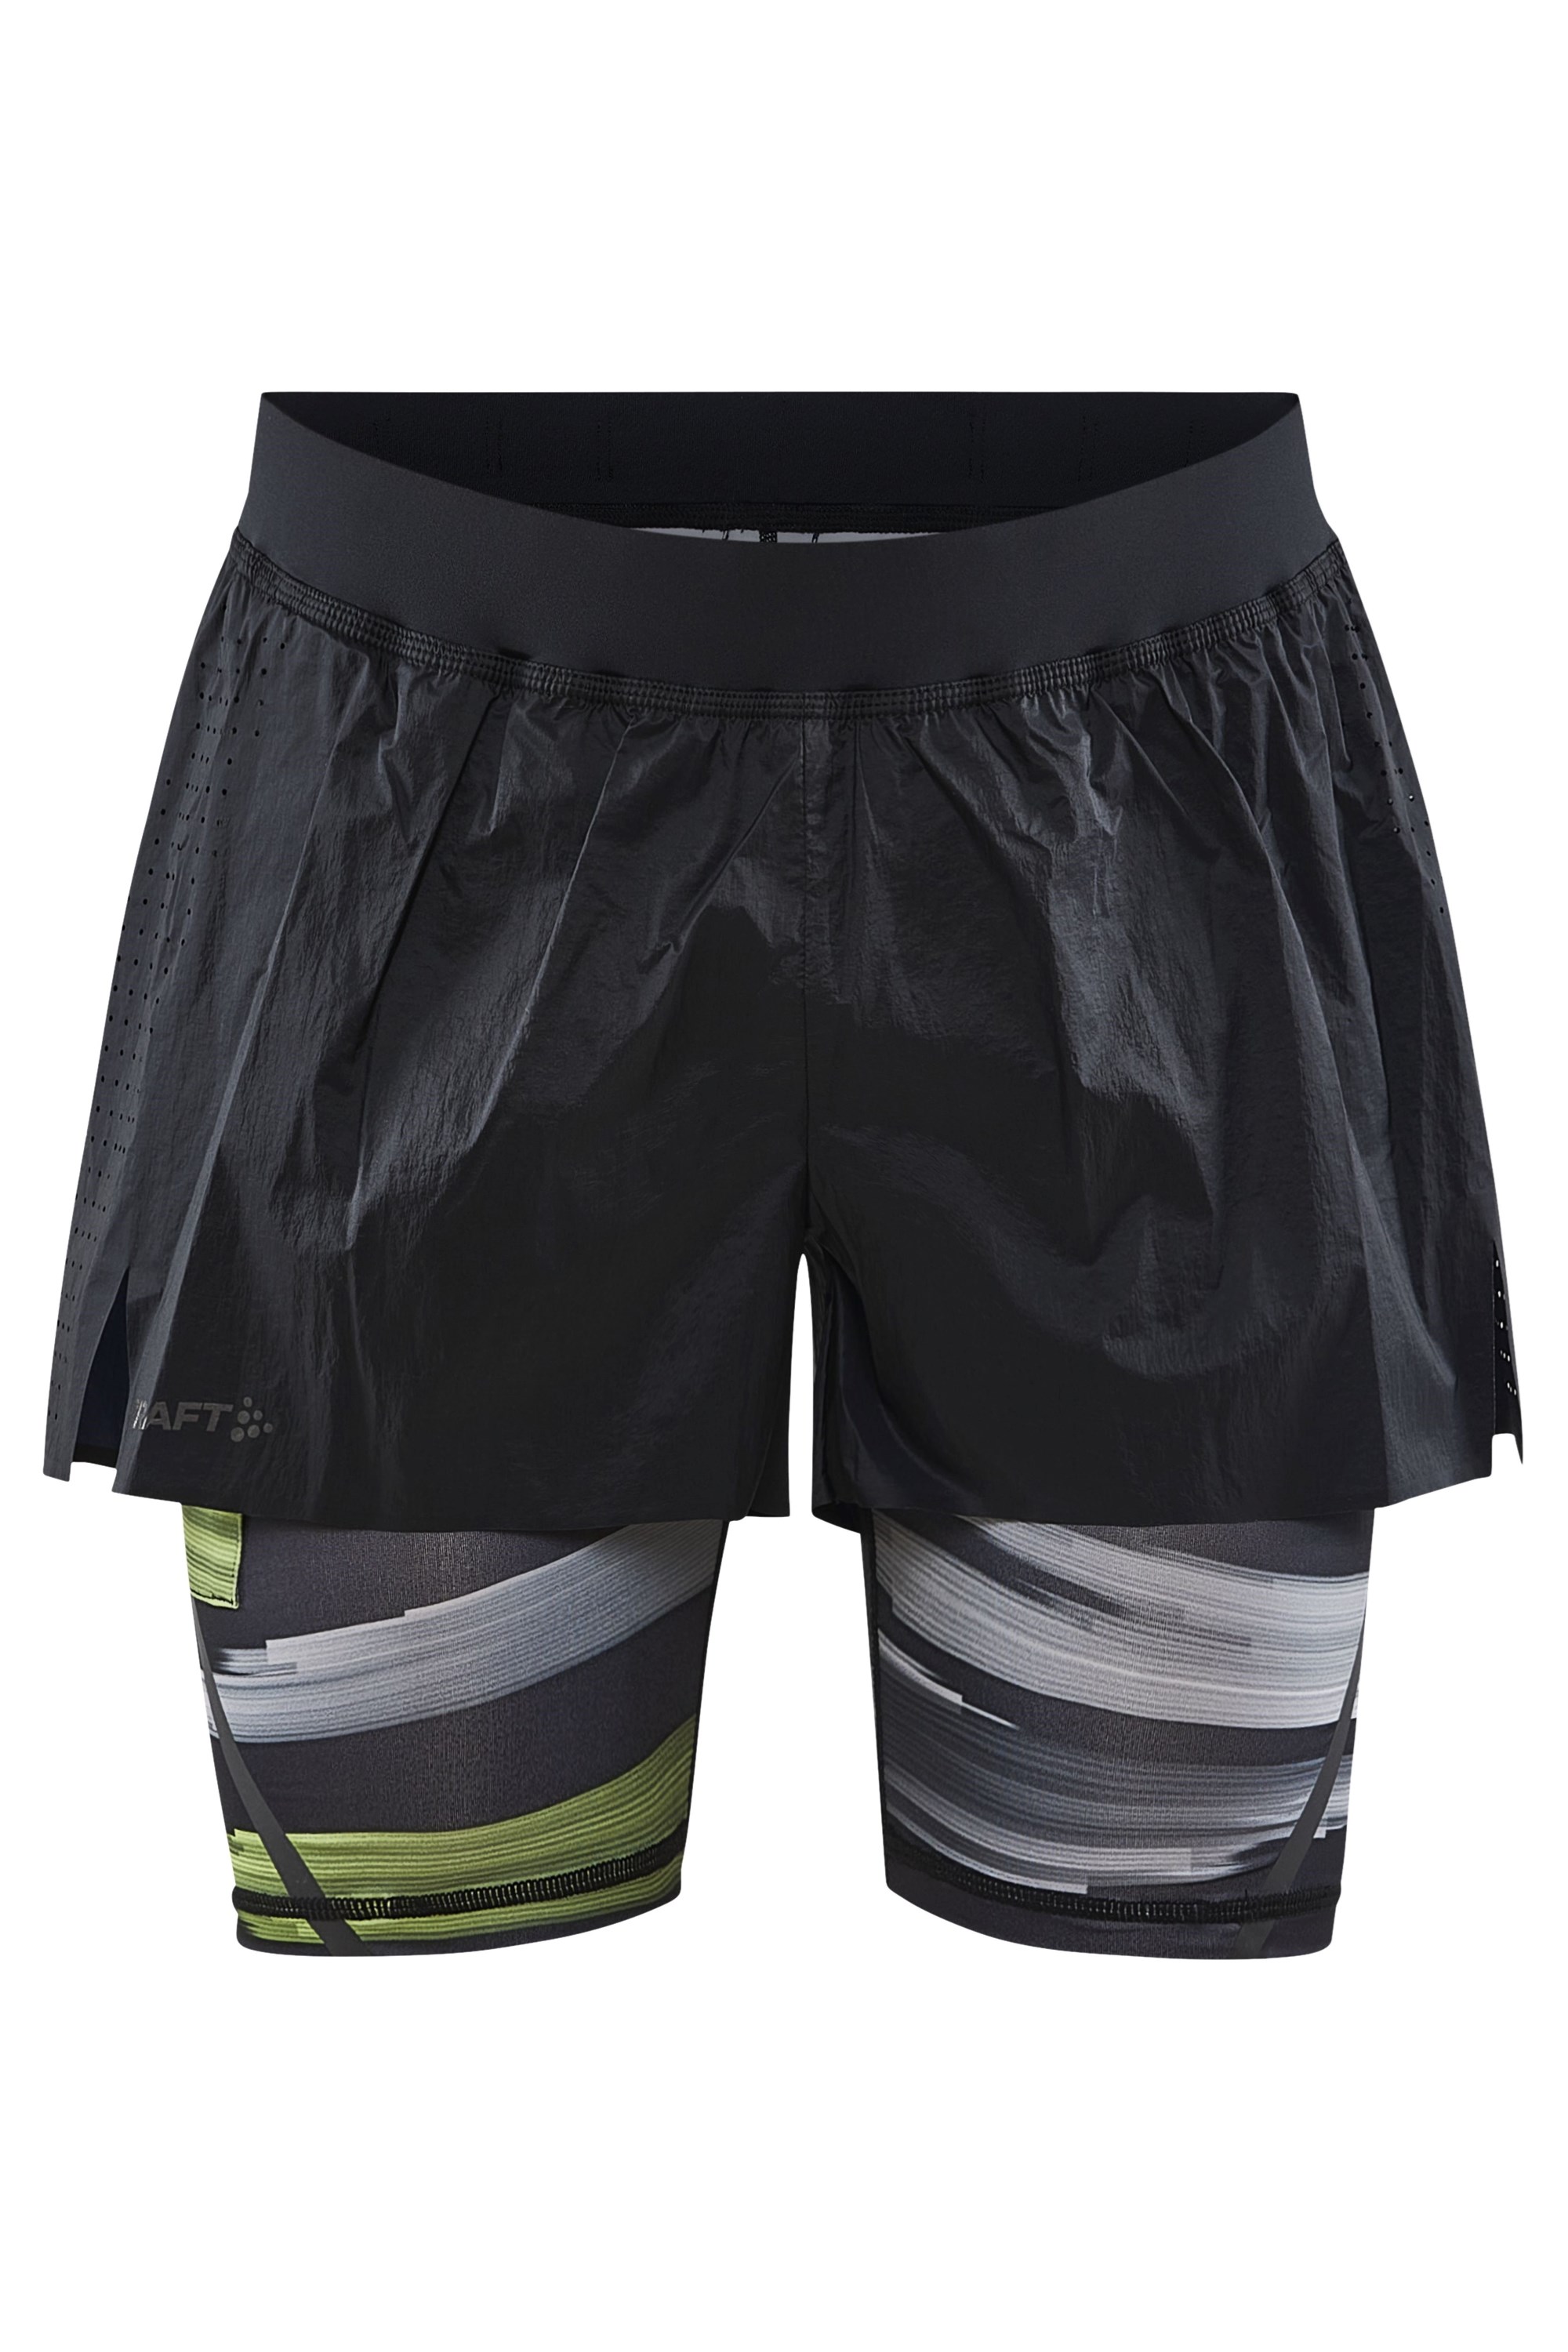 Ctm Distance Mens 2 In 1 Running Shorts -